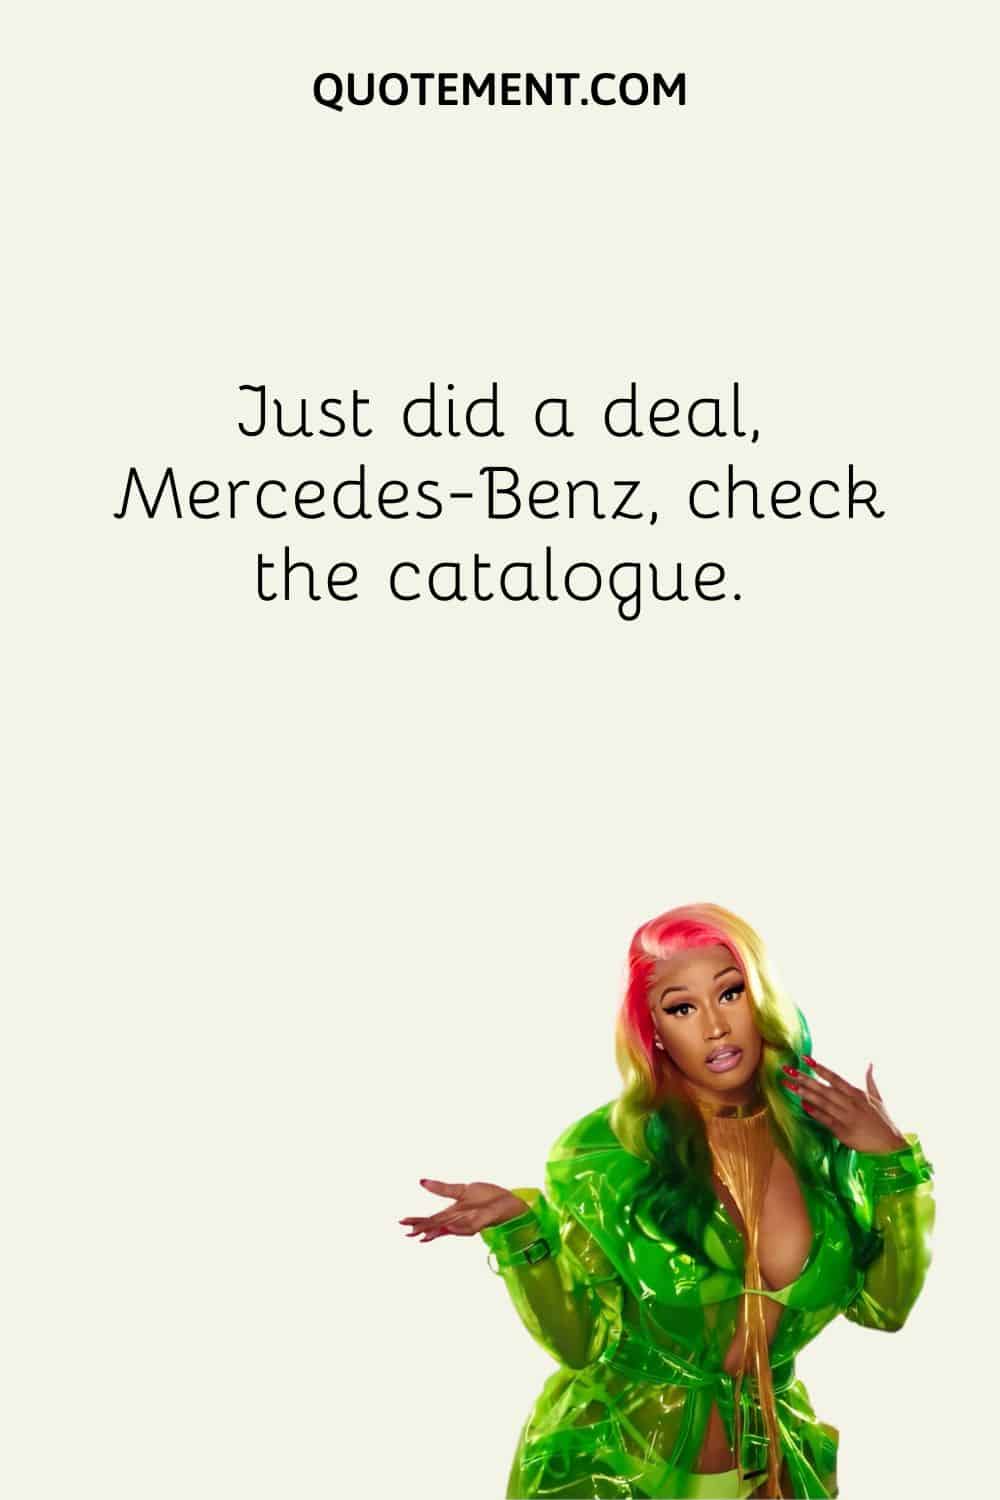 Just did a deal, Mercedes-Benz, check the catalogue